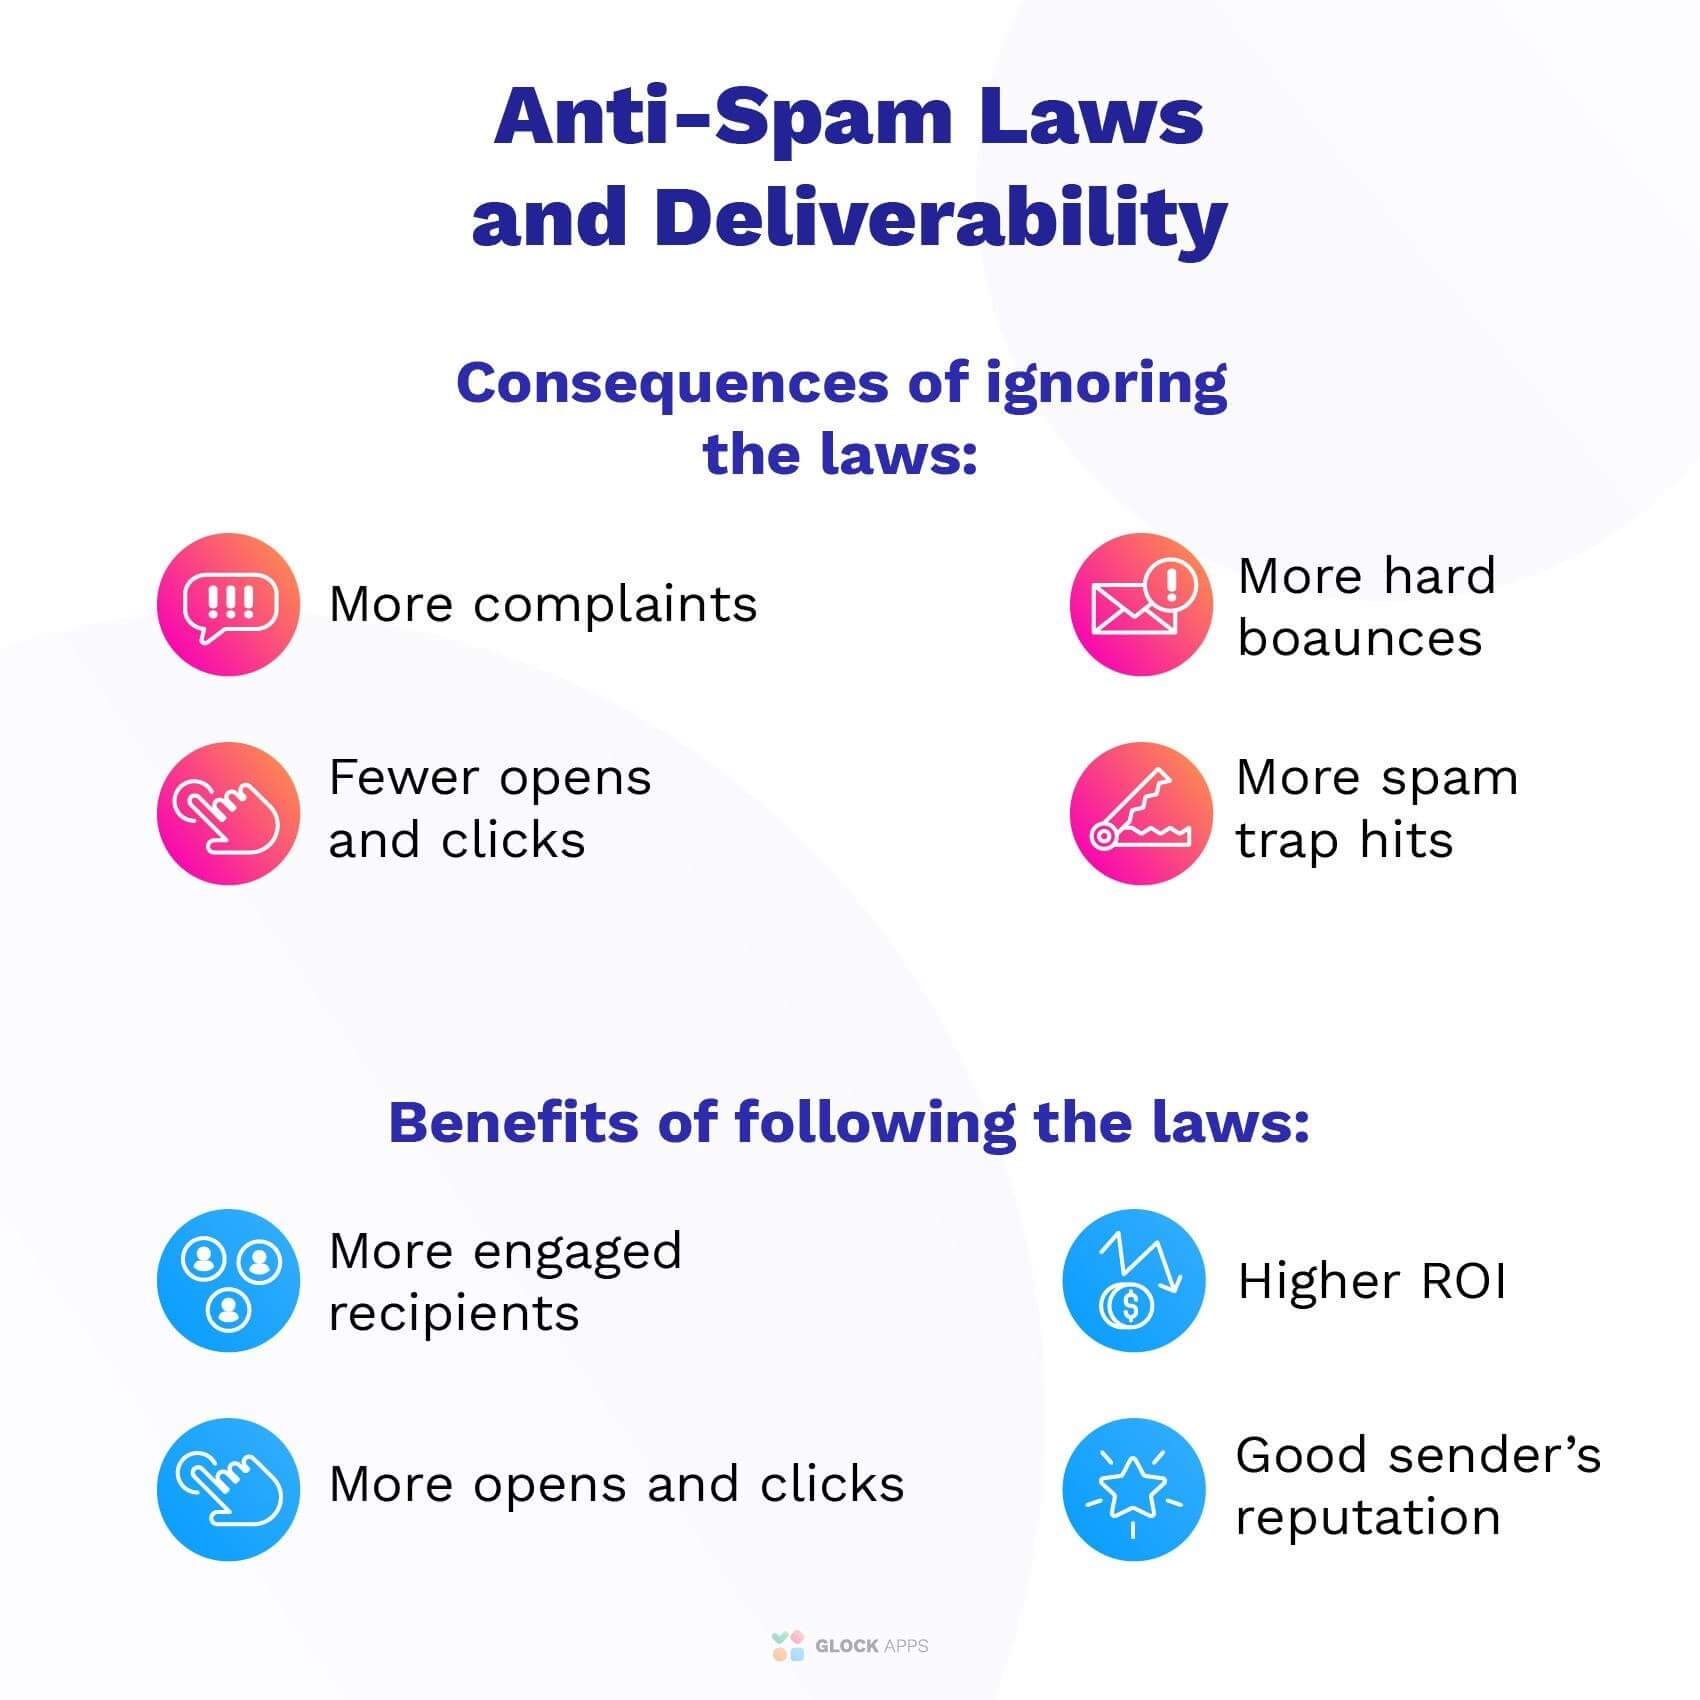 Correlation between anti-spam laws and email deliverability